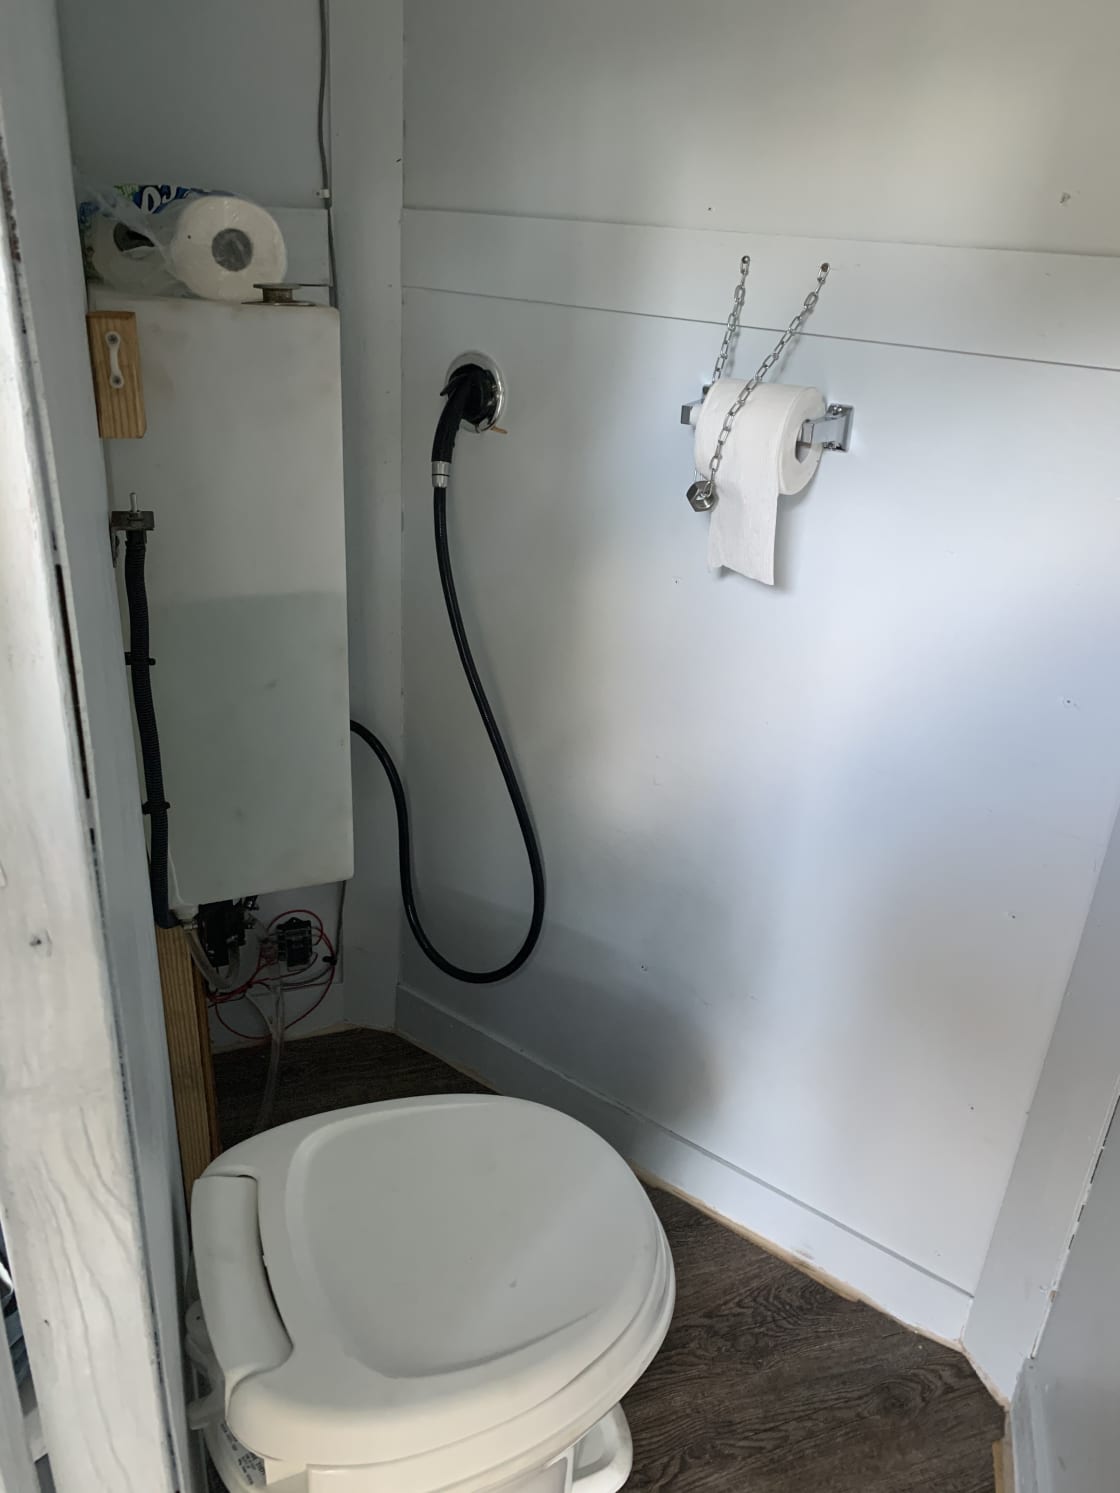 Bathroom in trailer.  Shower is on the exterior of trailer.  14 gallons of water provided